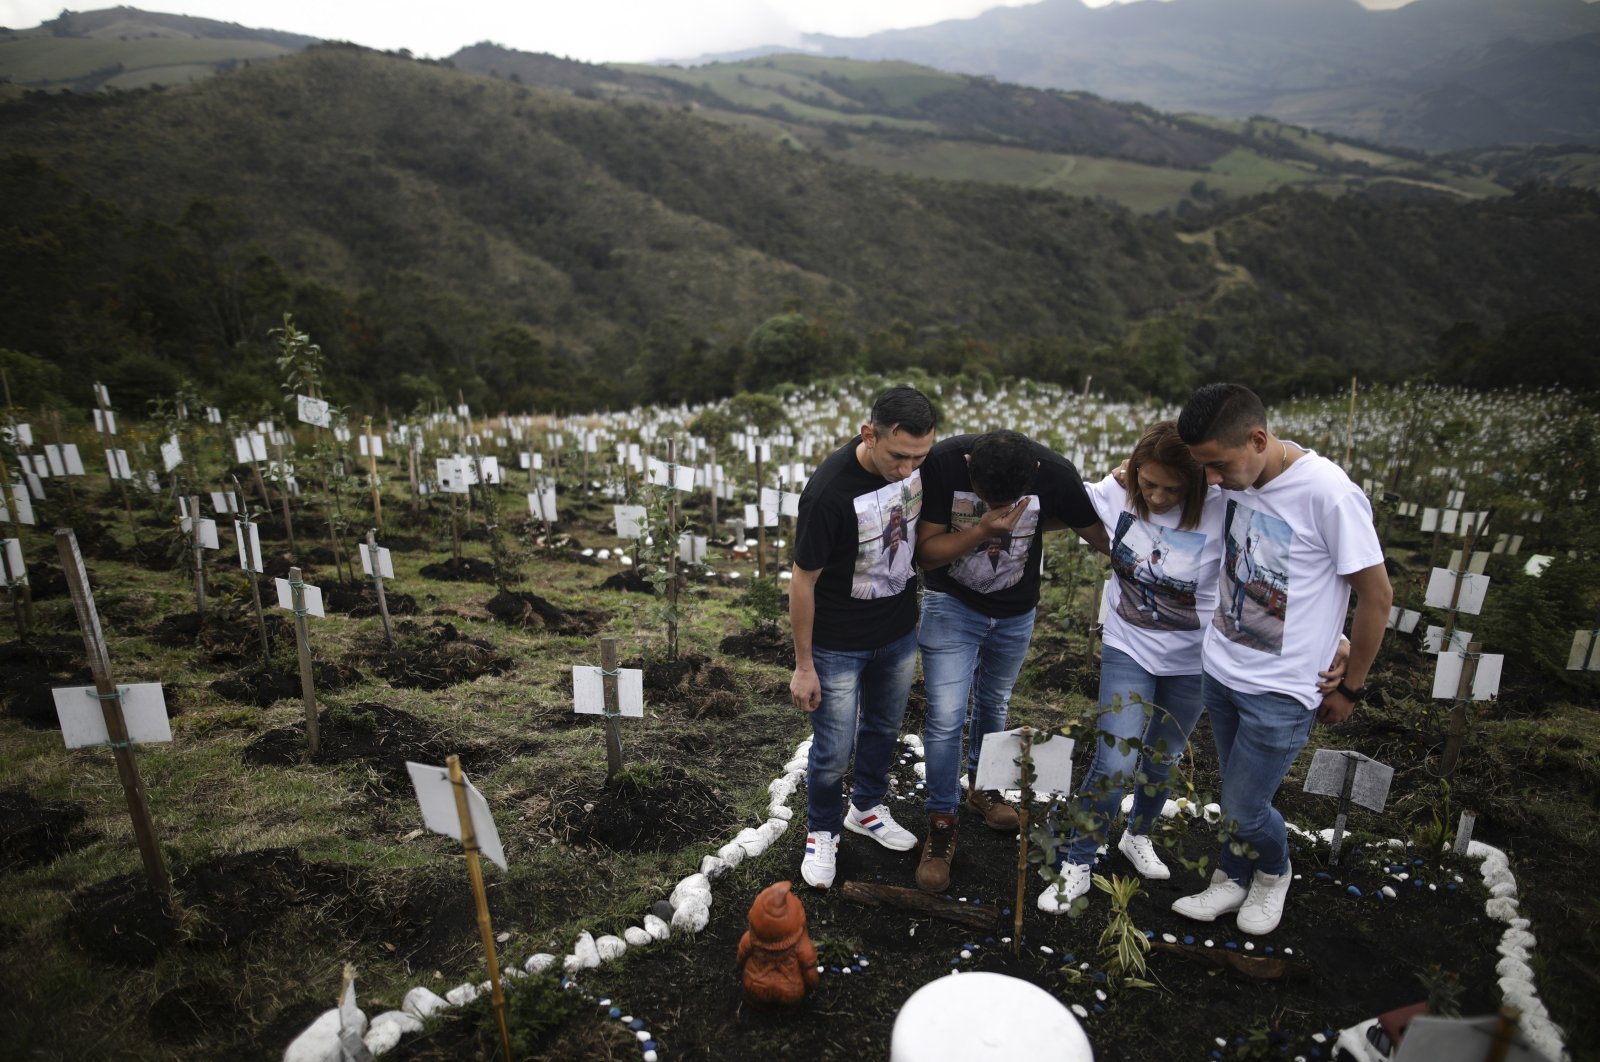 Relatives of Luis Enrique Rodriguez, who died of COVID-19, visit where he was buried on a hill at the El Pajonal de Cogua Natural Reserve, in Cogua, north of Bogota, Colombia, Oct. 25, 2021. (AP Photo)